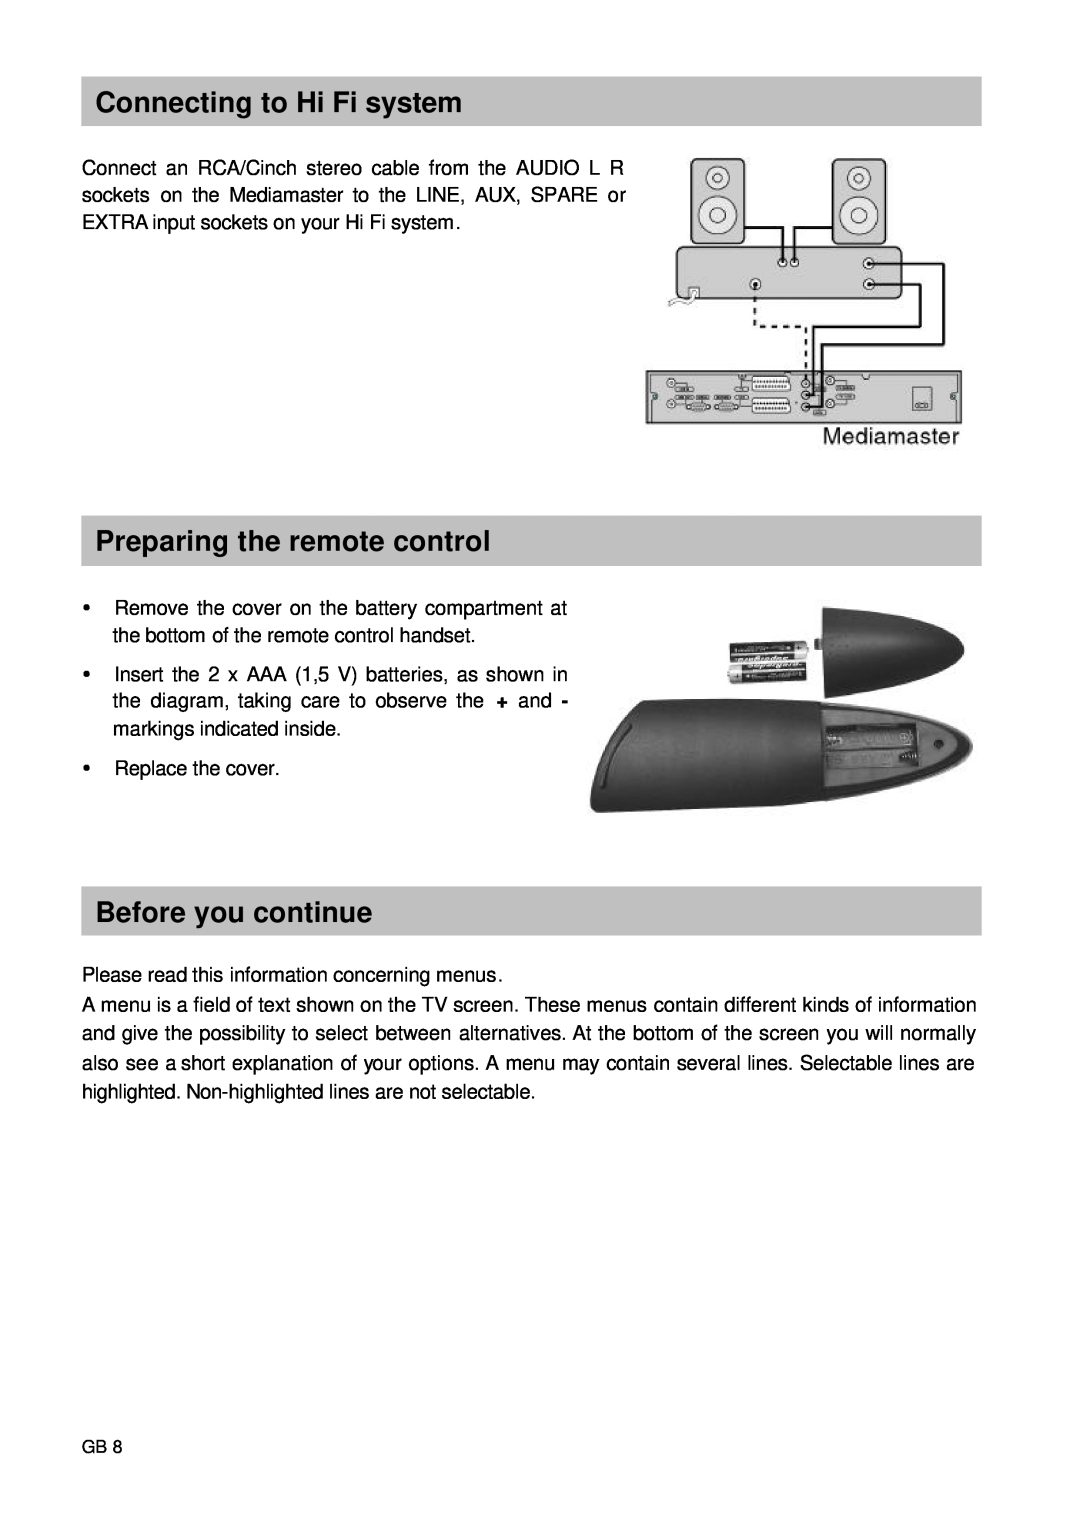 Nokia 9660S owner manual Connecting to Hi Fi system, Preparing the remote control, Before you continue 